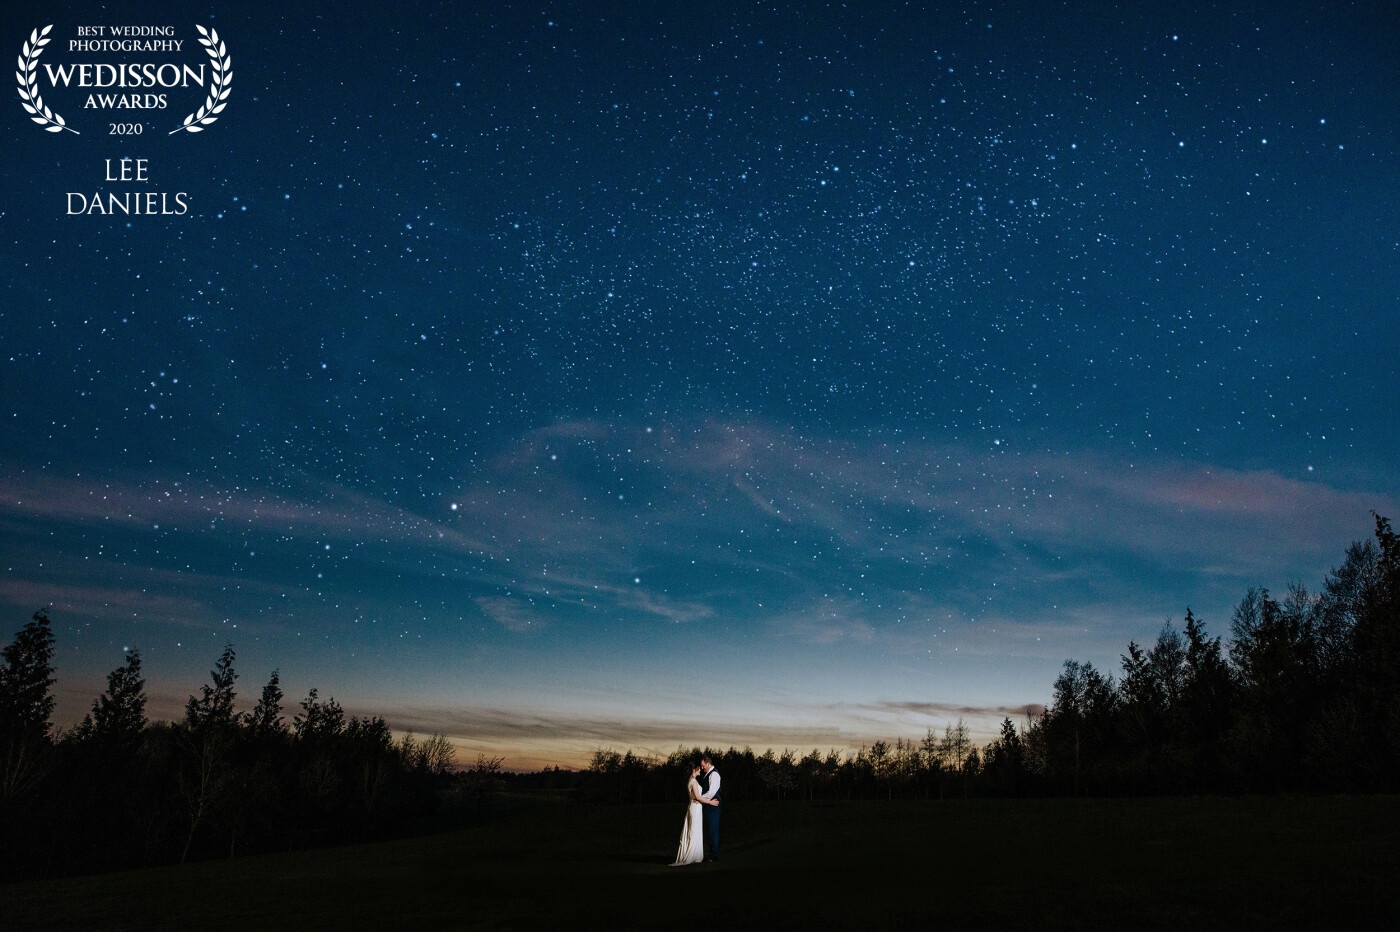 Golf courses have their benefits for wedding venues, the open space is great for after dark portraits. I found this composition that I like with the trees adding some texture to the image. I pulled out some stars with long exposure and a low powered burst of flash on Emma & Glenn made them pop. 